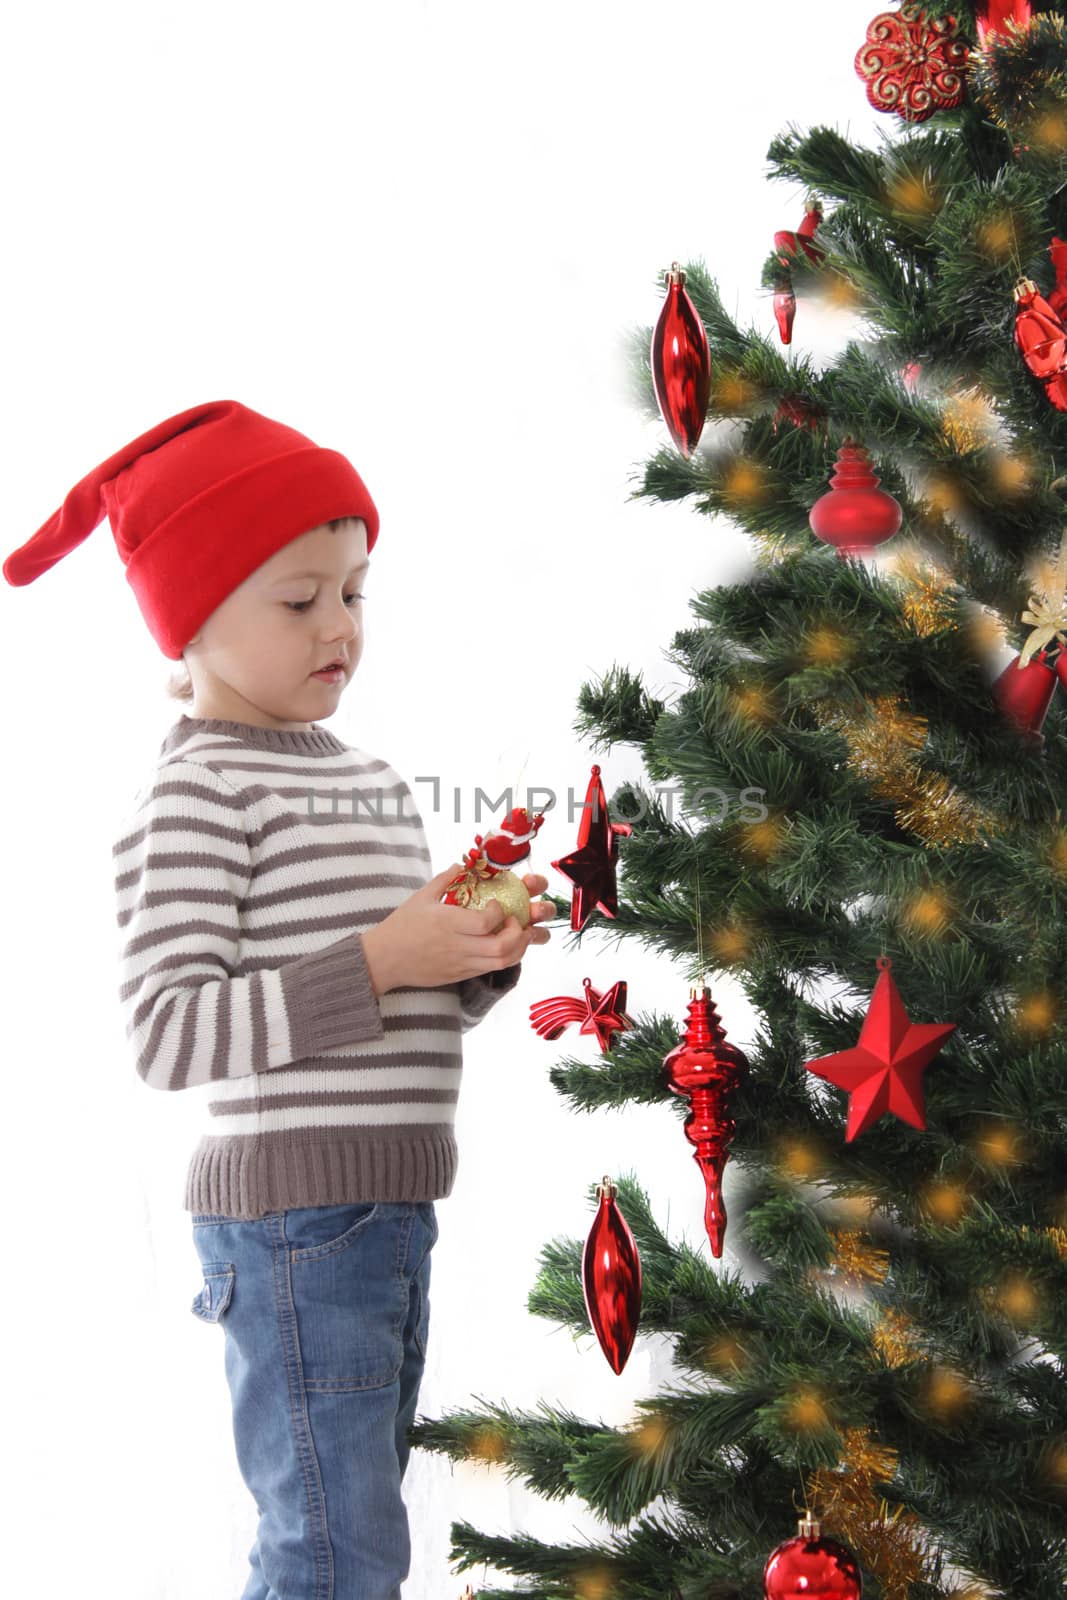 Boy in Santa hat decorating Christmas tree isolated on white